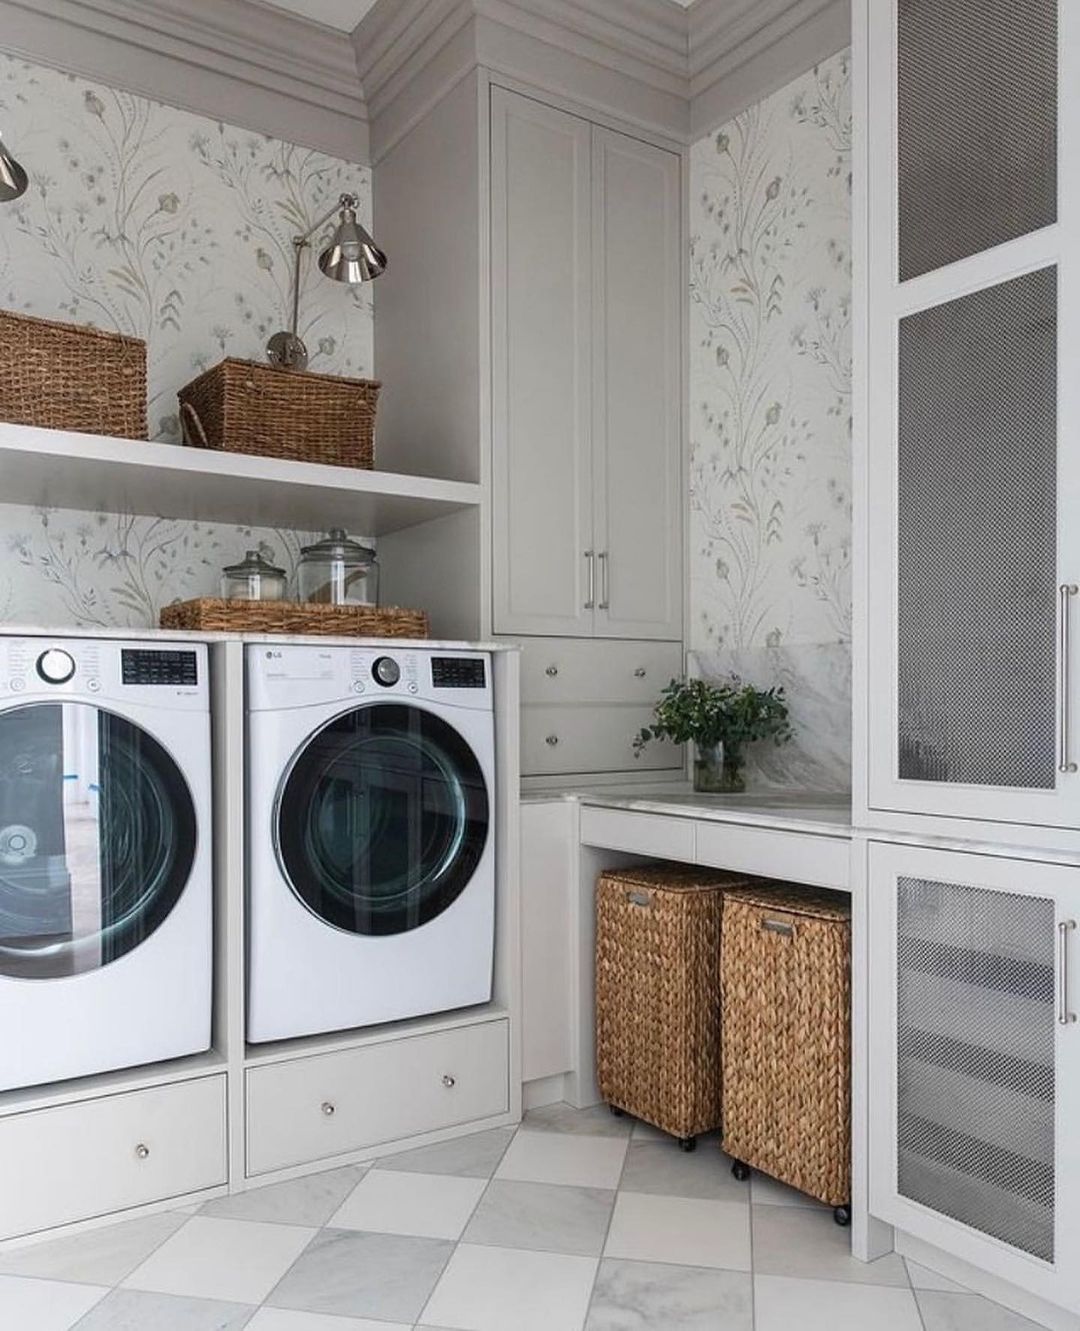 Sophisticated Floral Elegance in a Laundry Room